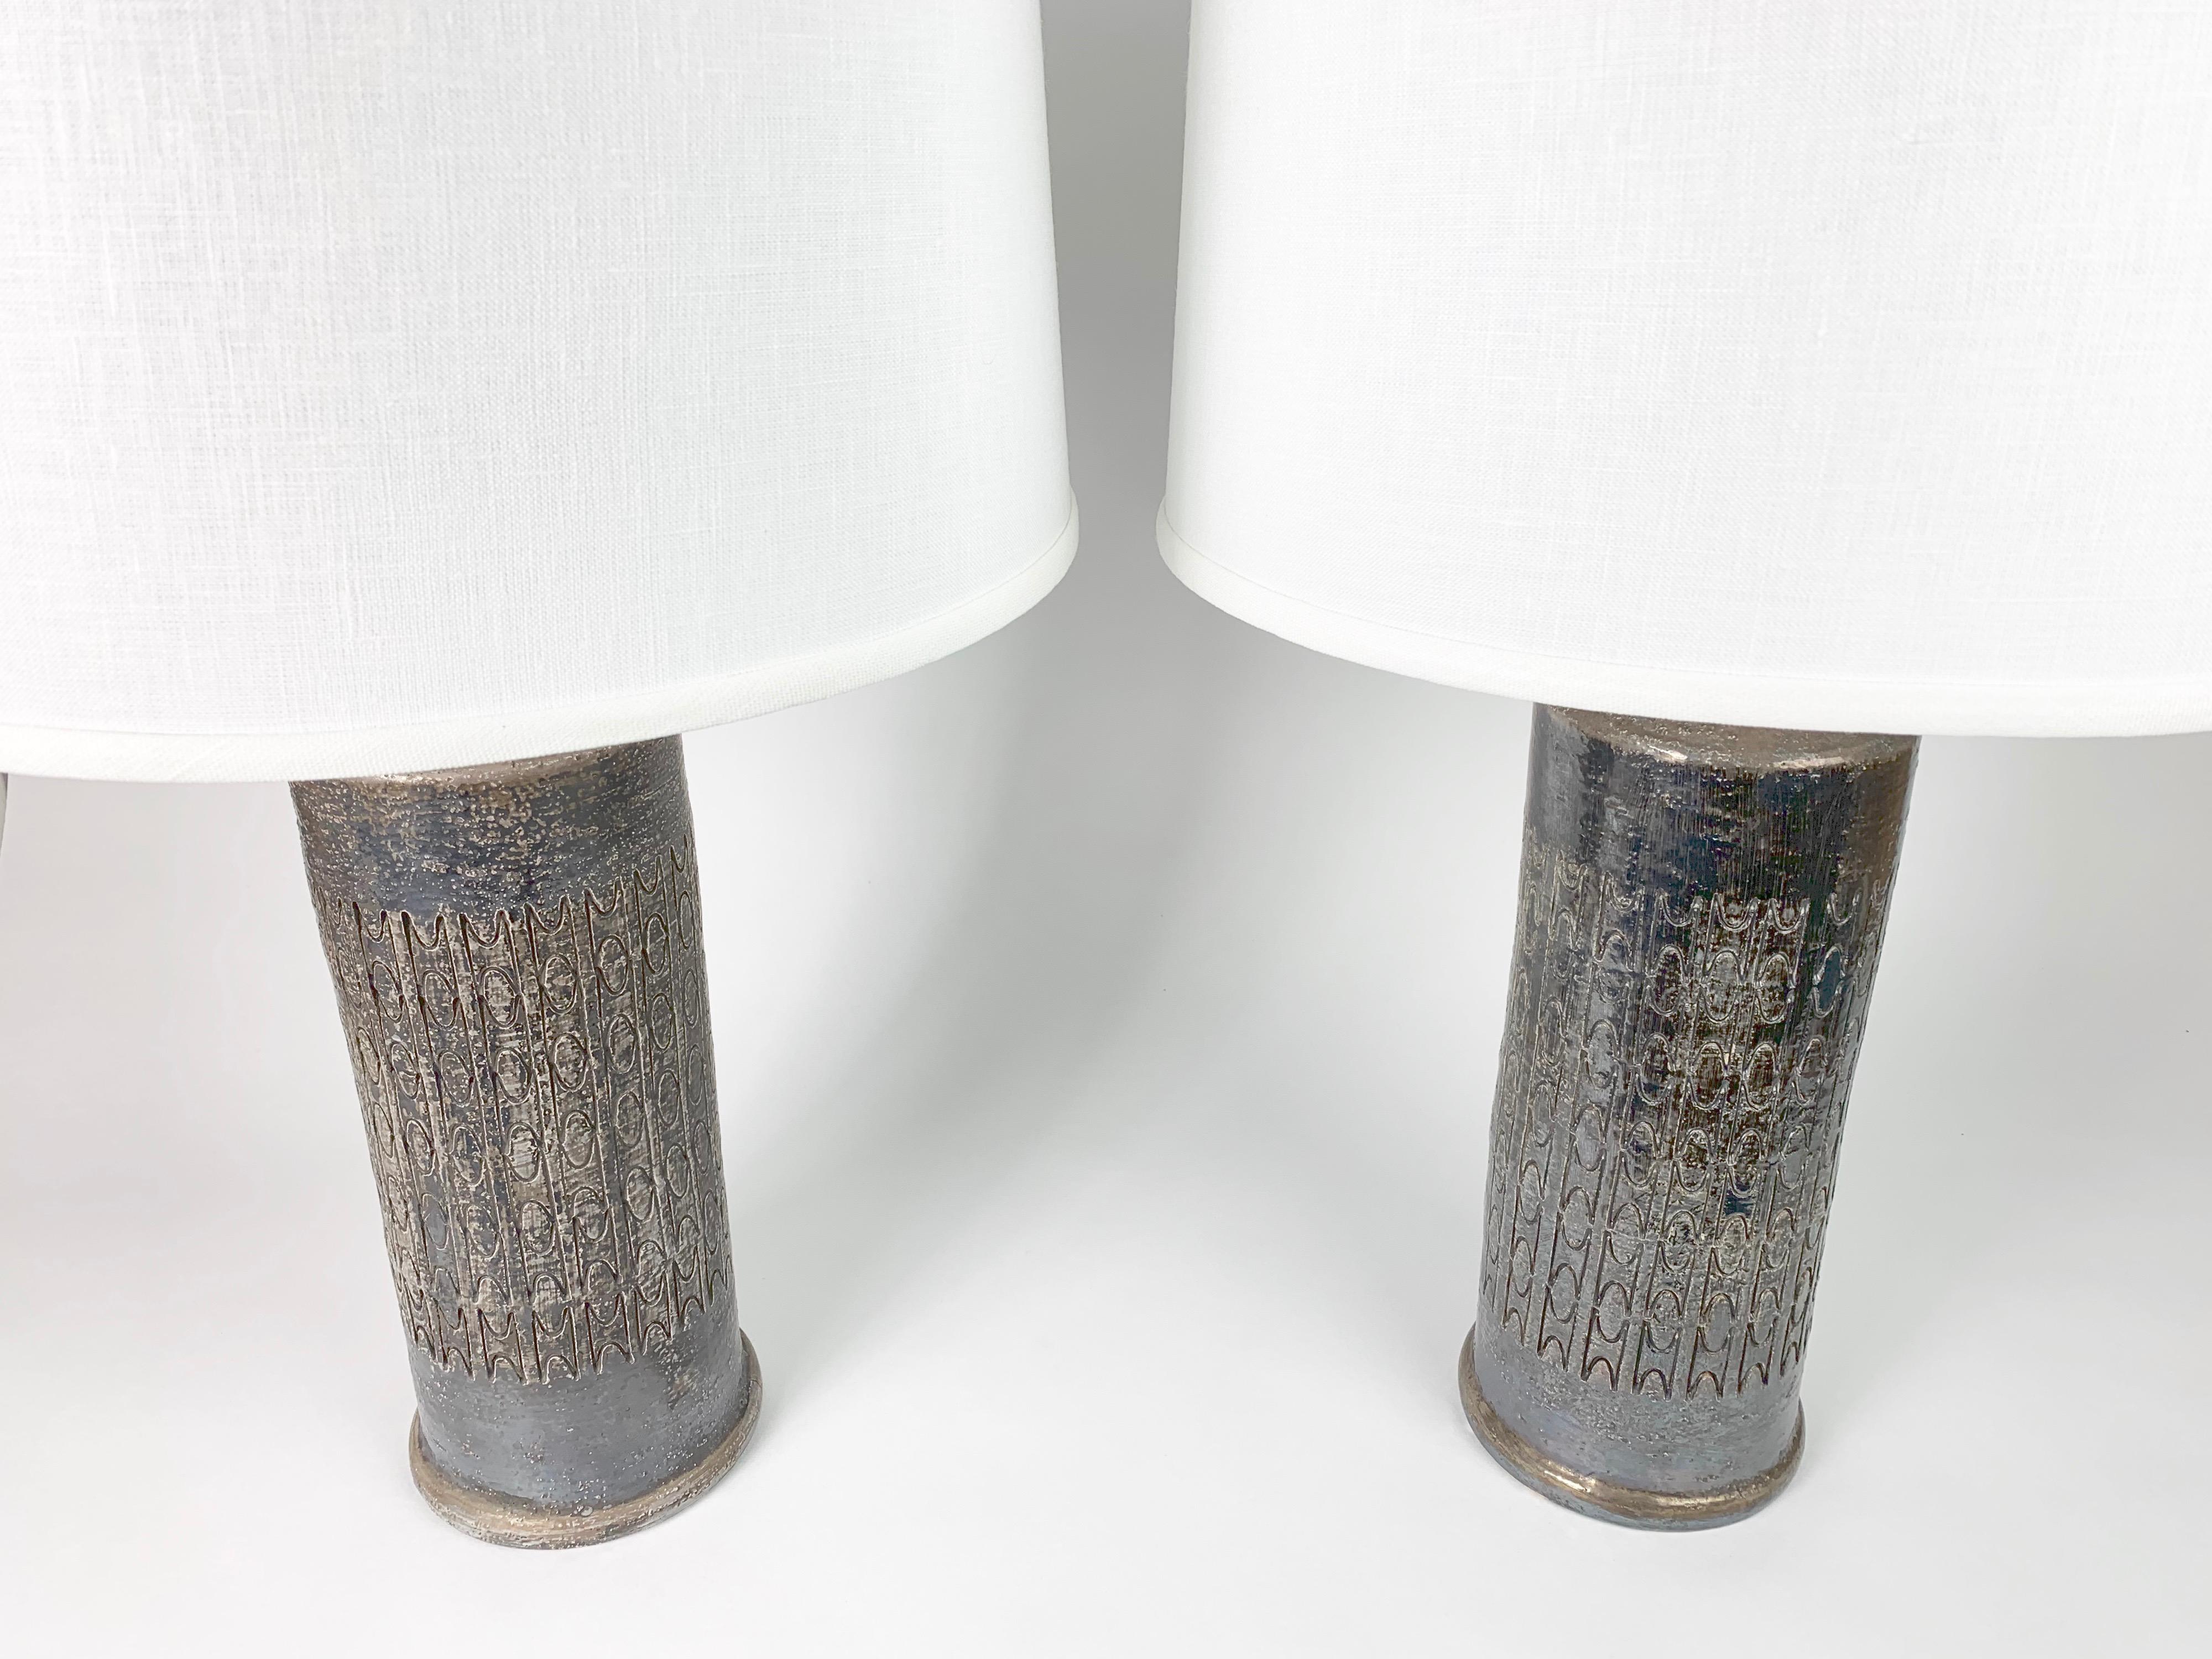 Bitossi lamps Italy 1970s ceramic in a black and silver multi layered glaze with an earthy super sophisticated dark look, signed.
Rewired for the US.

Shades not included.